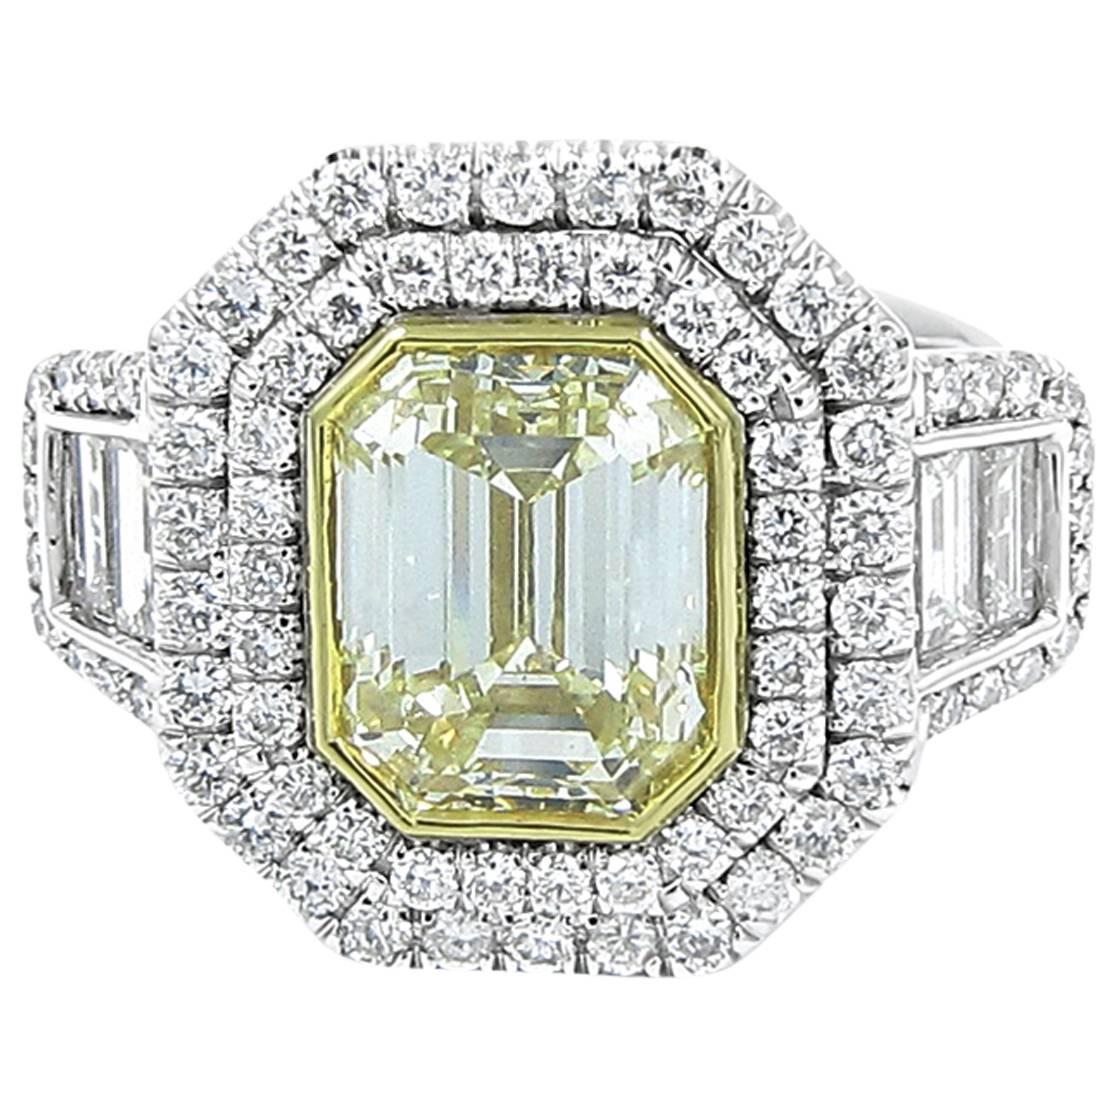 4.01 Carat Fancy Yellow Diamond Engagement Ring For Sale